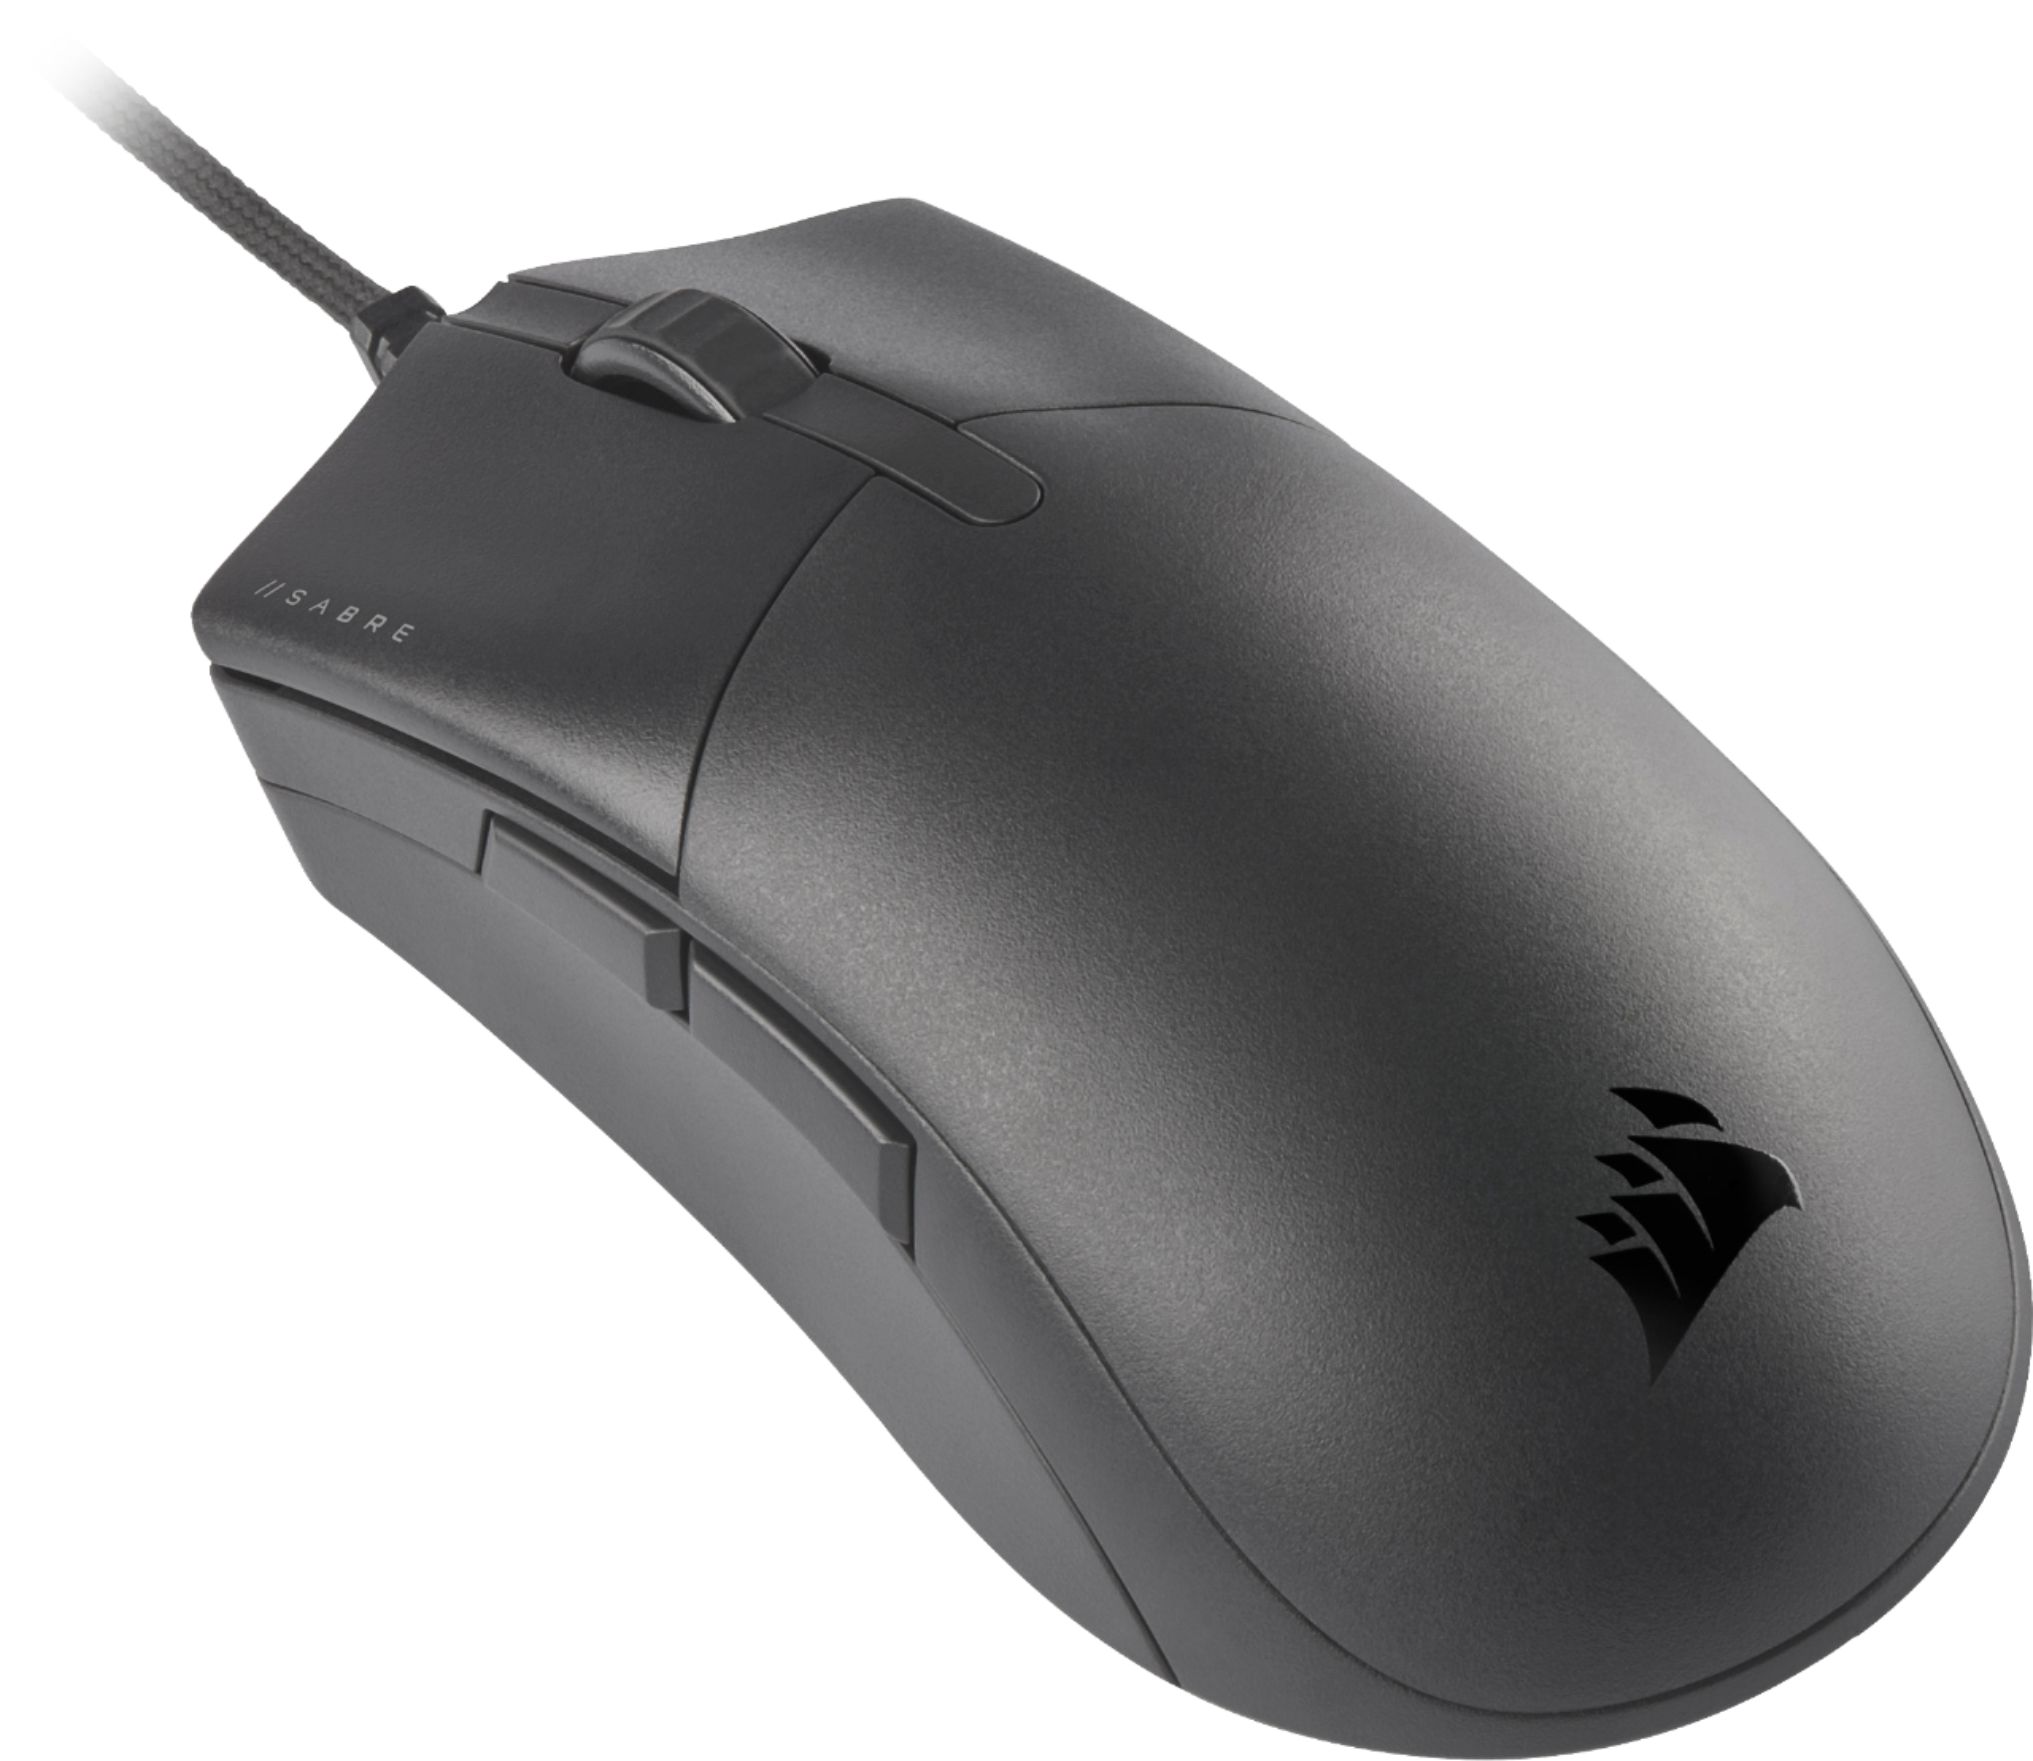 Angle View: Arozzi - Favo Light Weight Gaming Mouse - Black